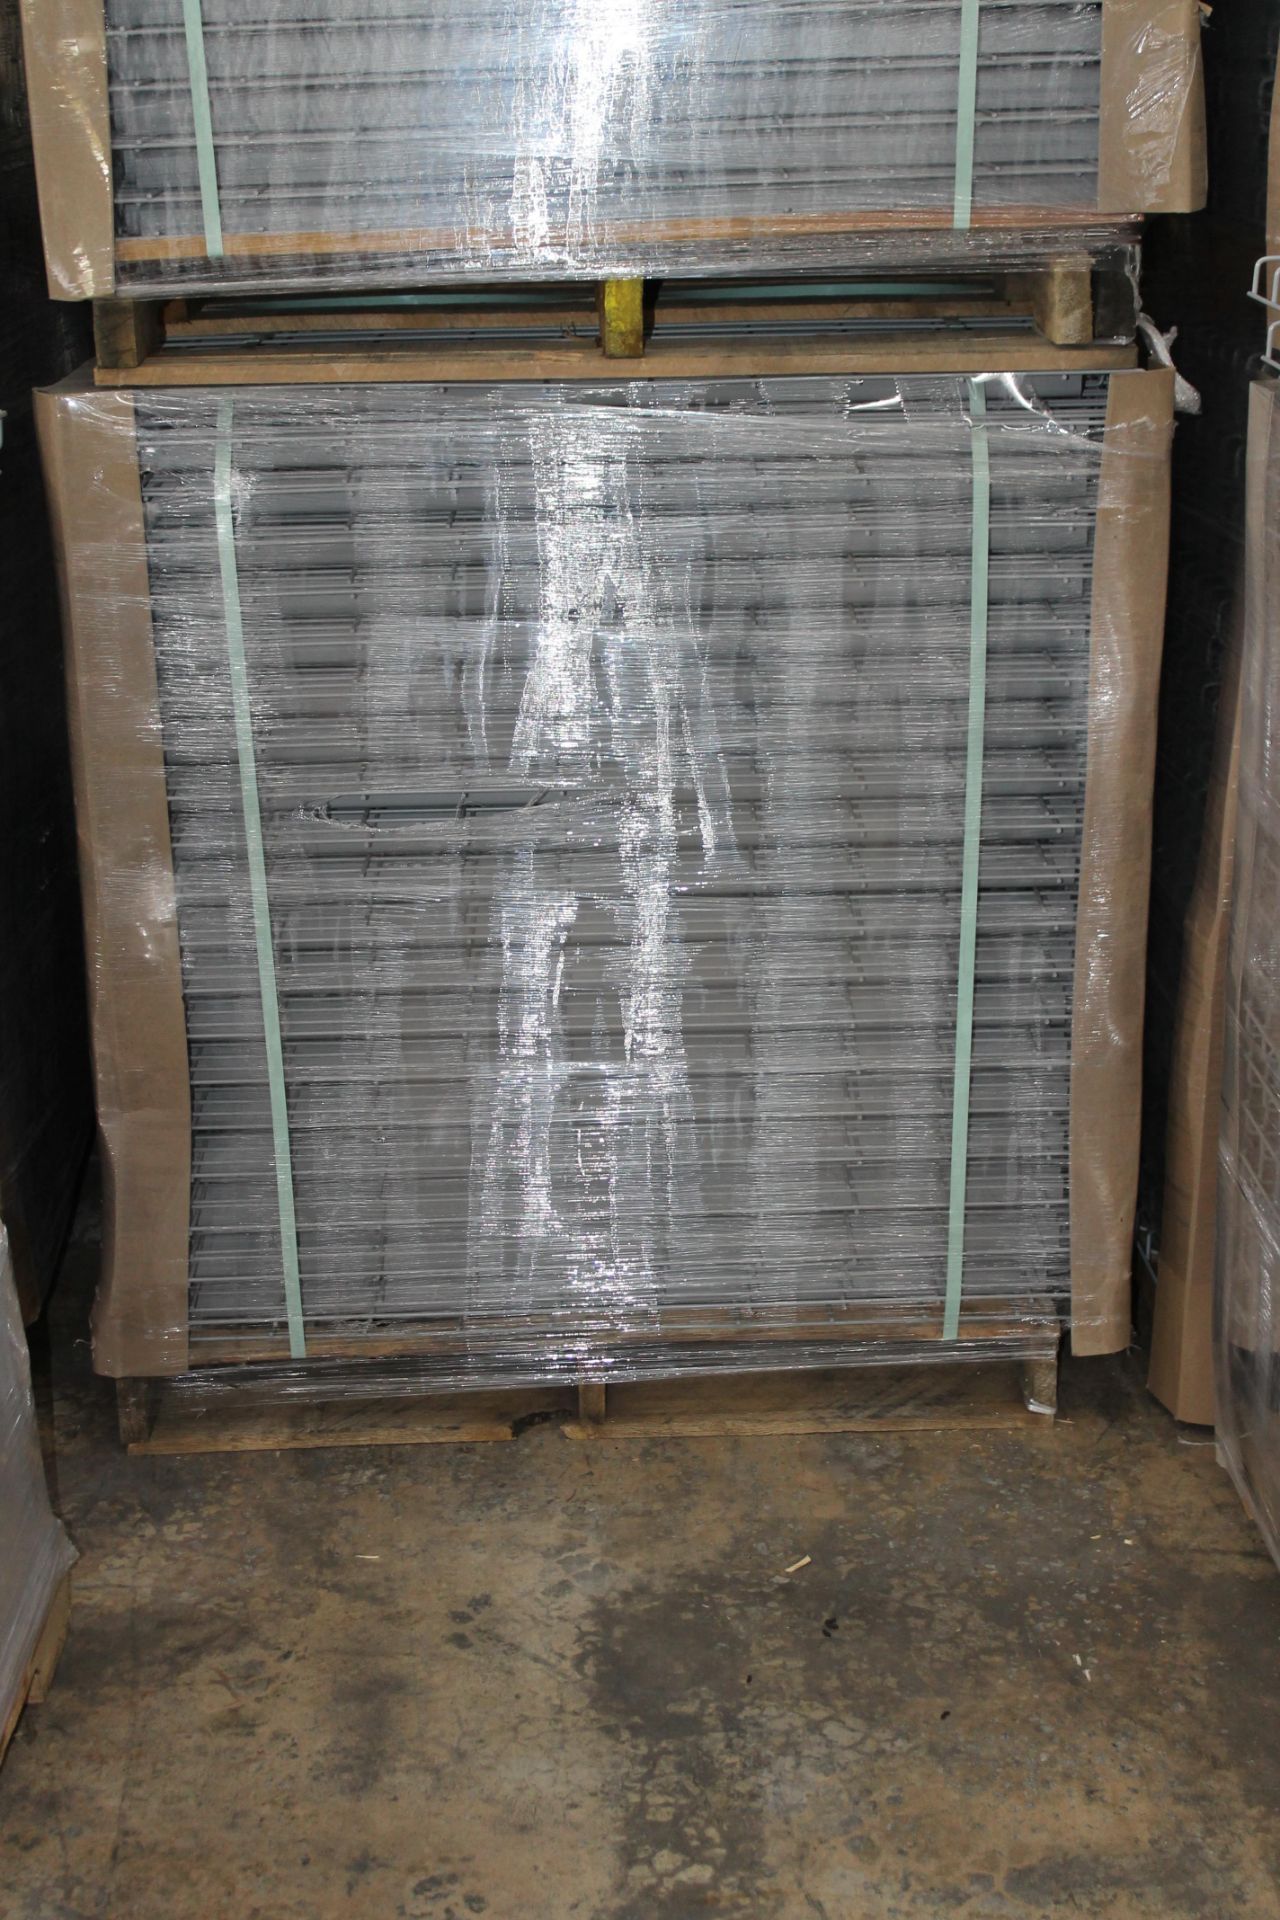 NEW 80 PCS OF STANDARD 42" X 46" WIREDECK - 2200 LBS CAPACITY - Image 2 of 2